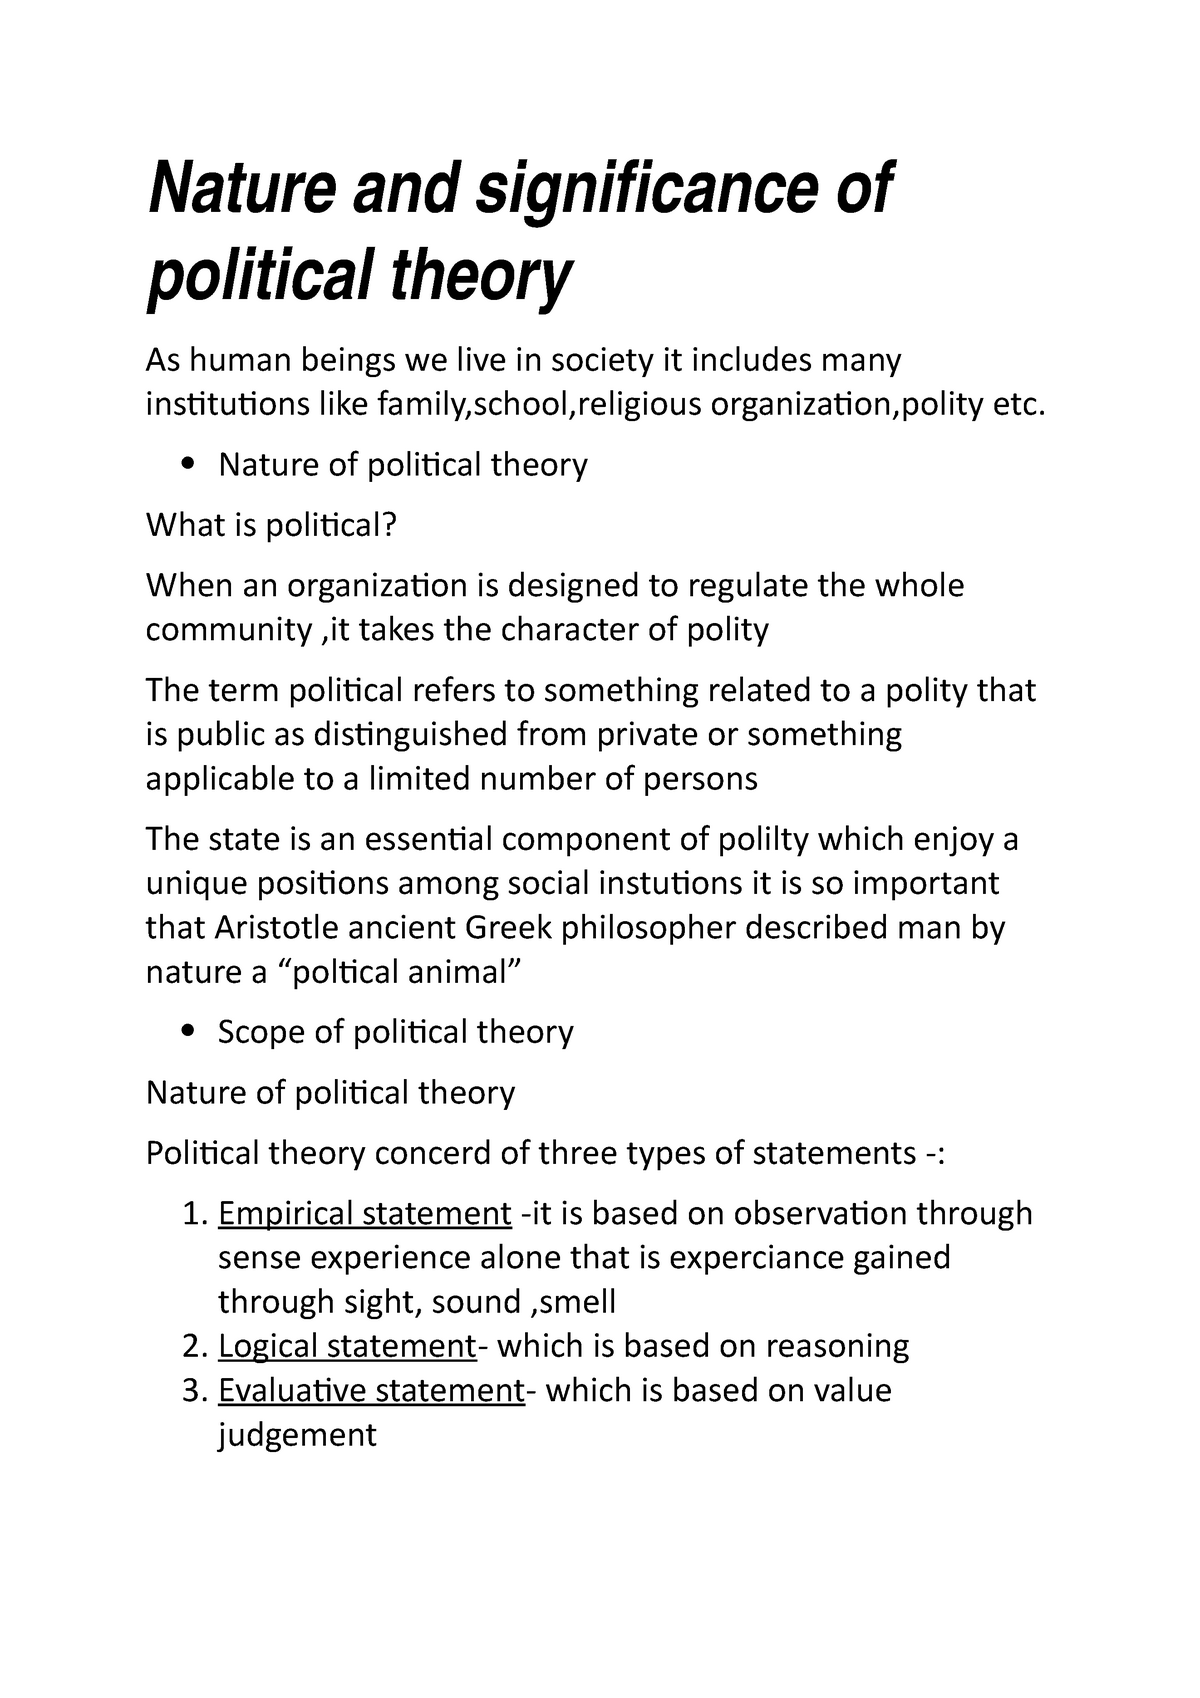 write an essay on kinds of political theory